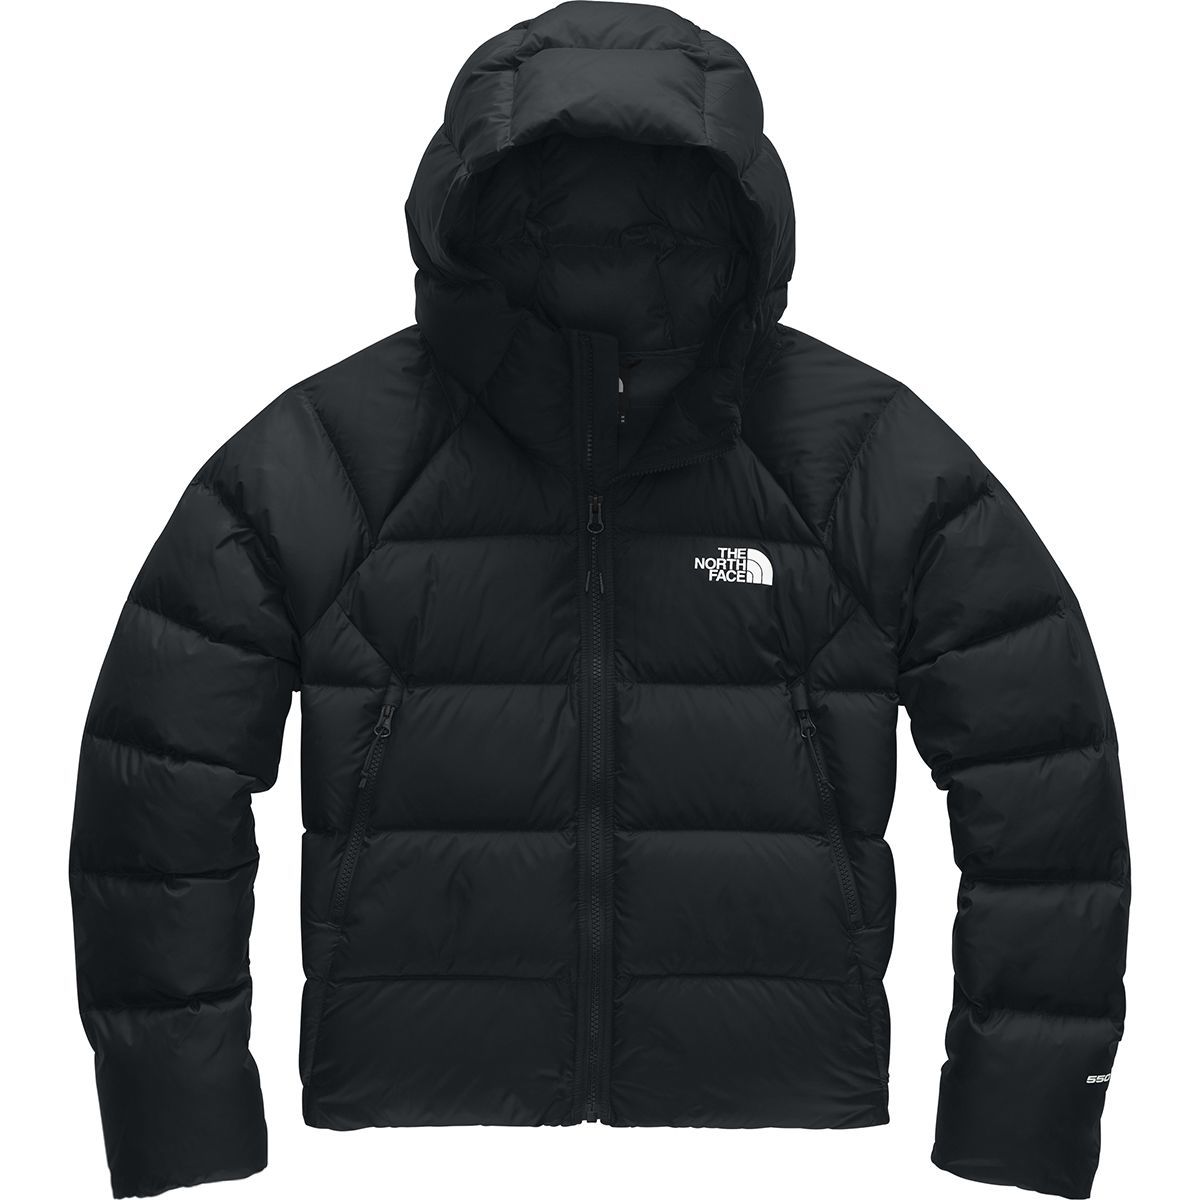 The North Face Hyalite Down Hooded Jacket - Women's | Backcountry.com